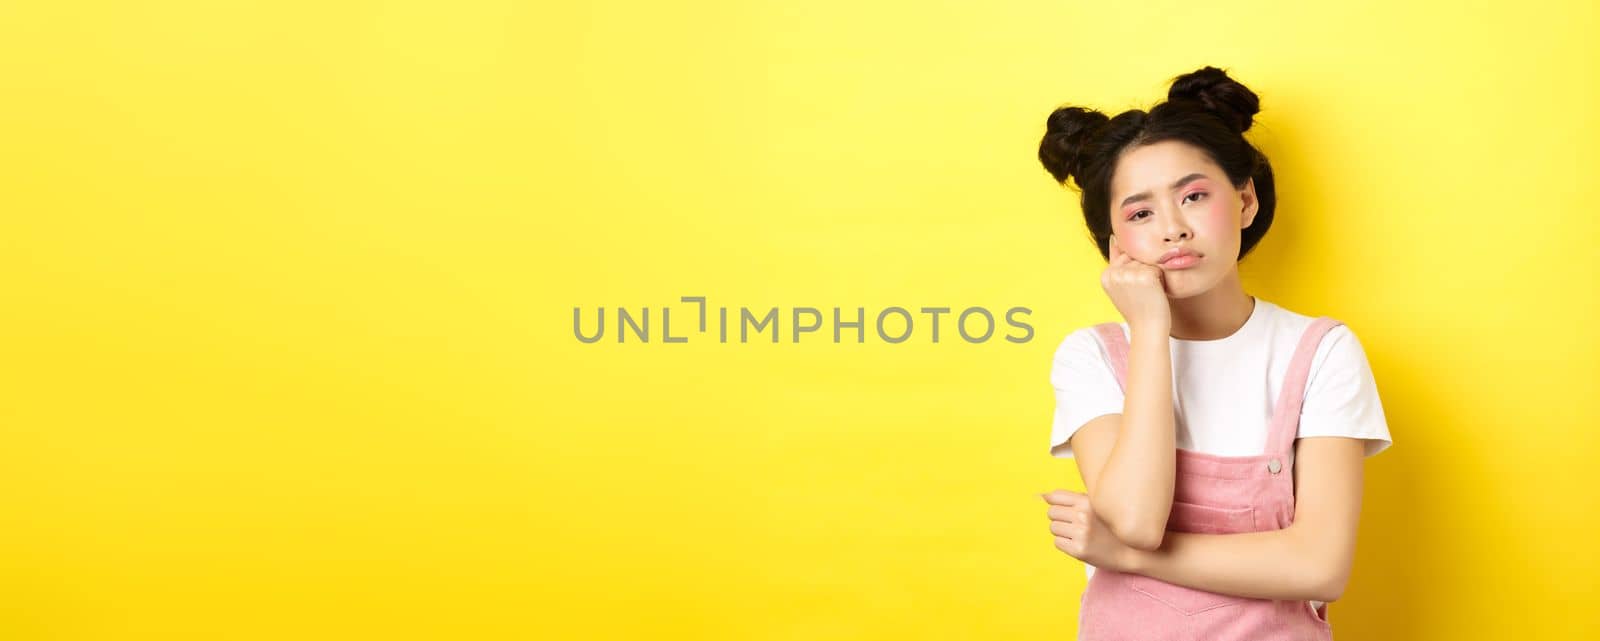 Sad and bored teen asian girl standing alone, looking at camera indifferent, staring with boredom, yellow background.